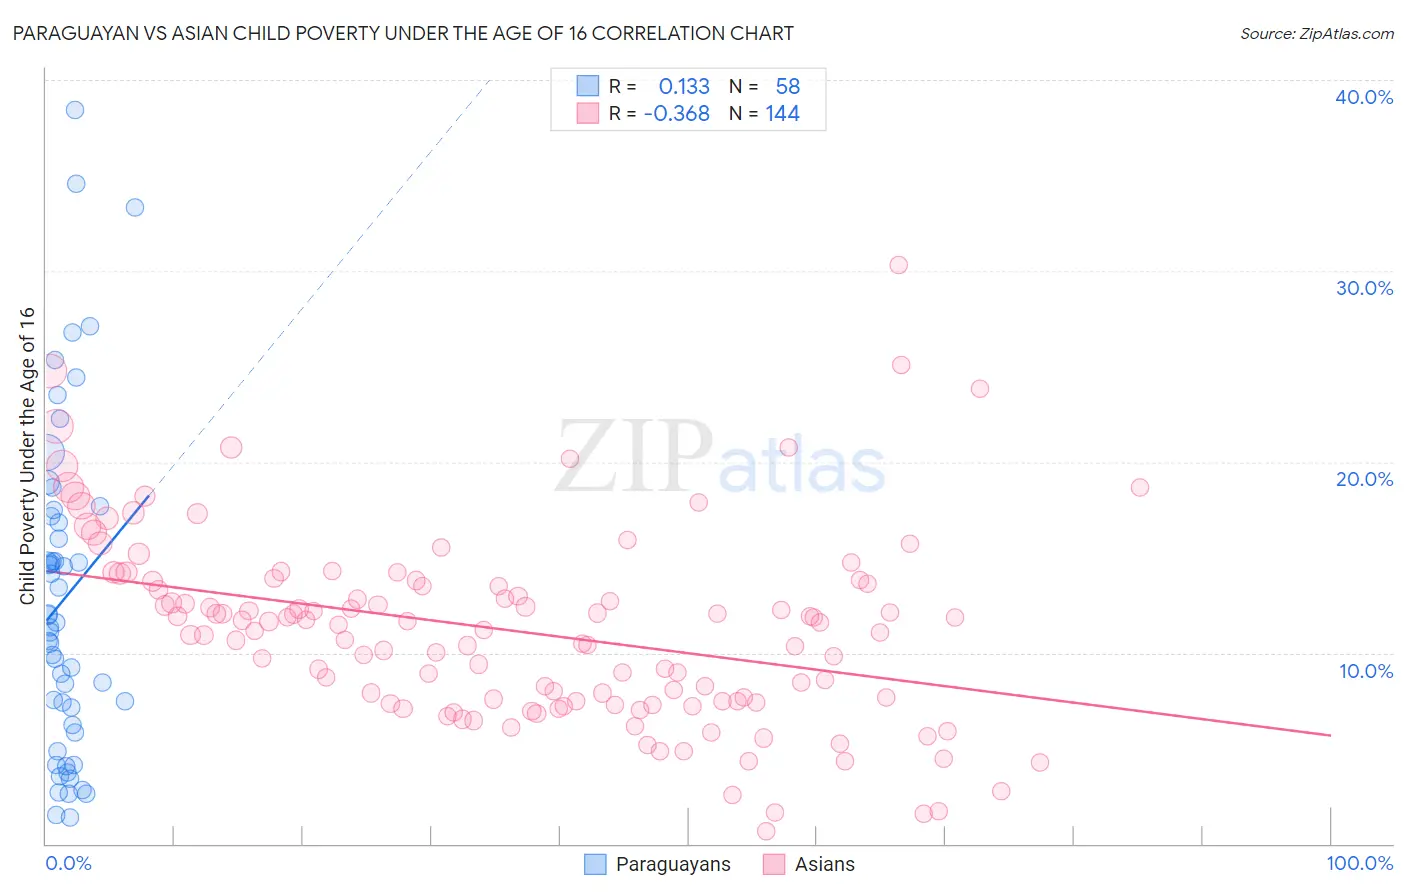 Paraguayan vs Asian Child Poverty Under the Age of 16